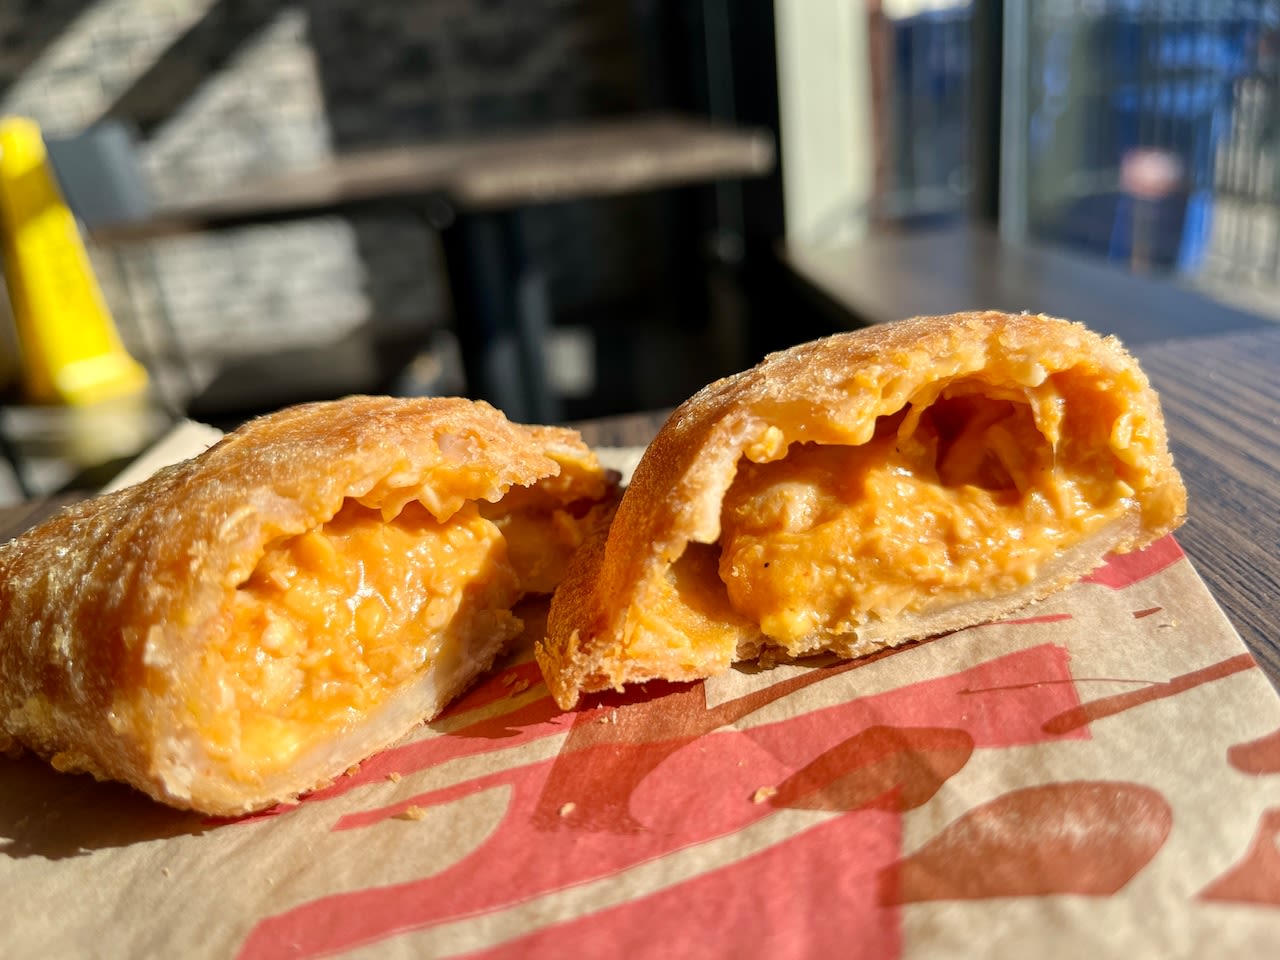 A Taco Bell fan-favorite menu item is returning for a limited time only